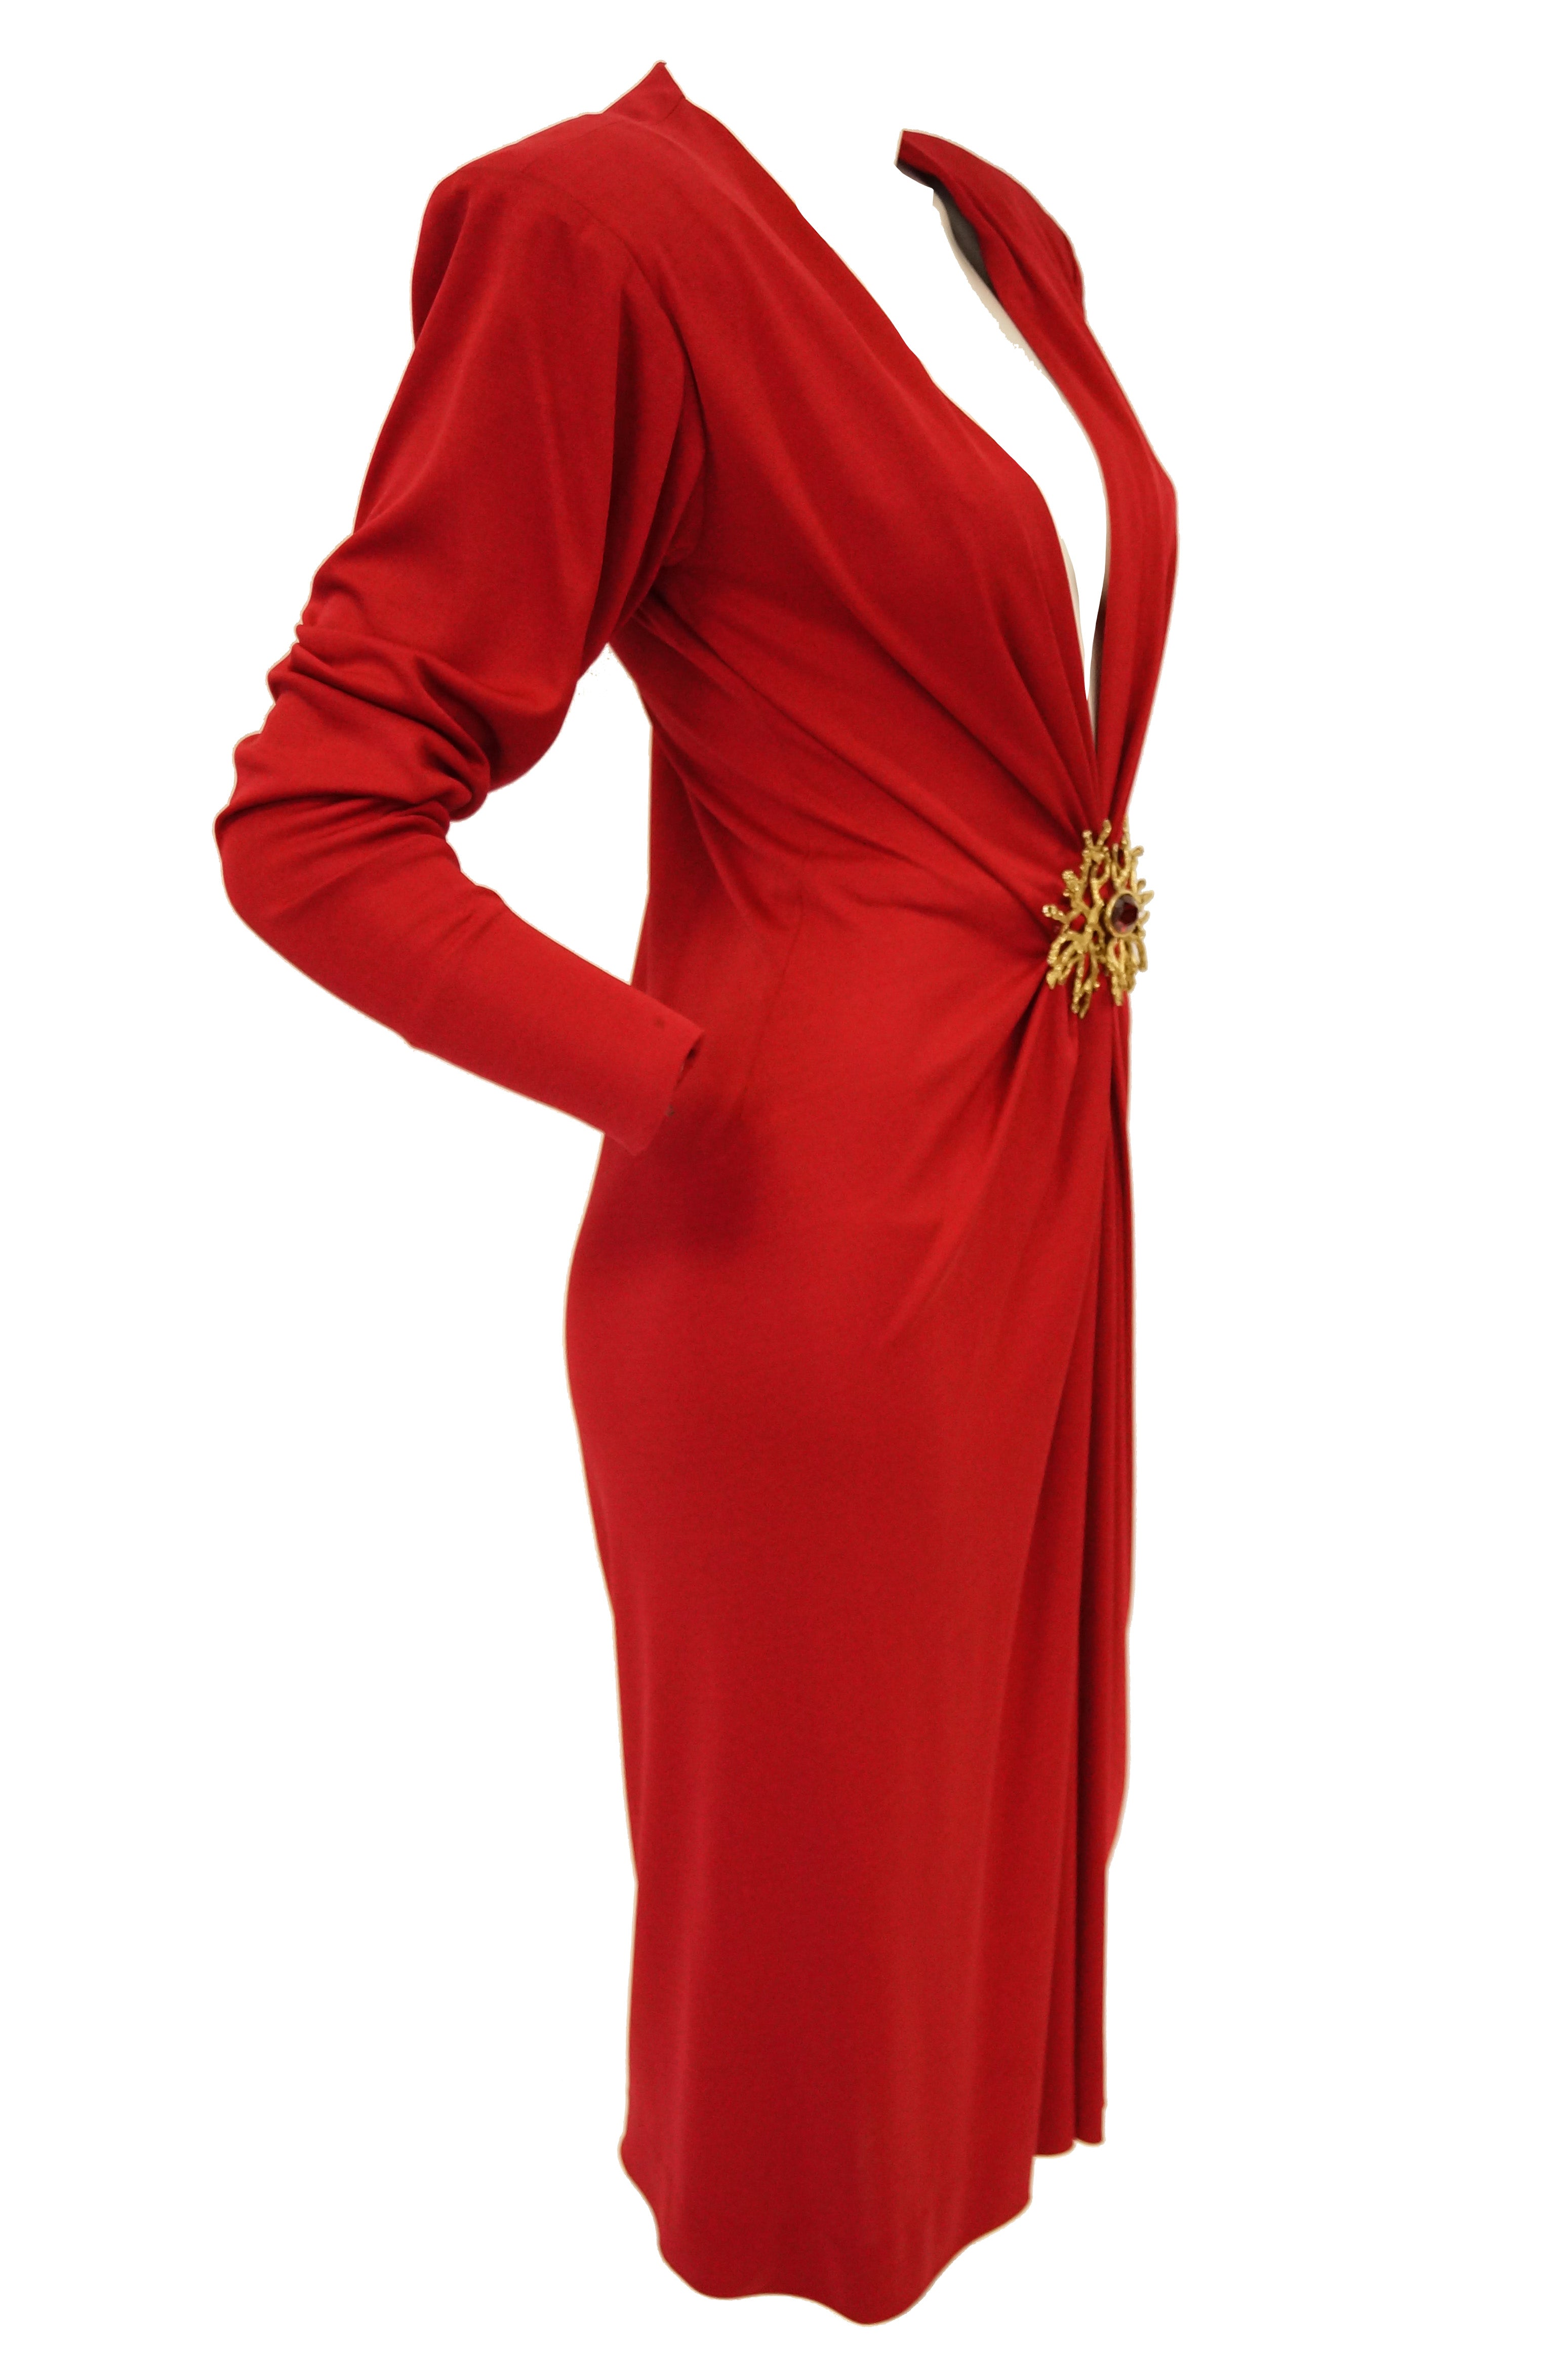 Yves Saint Laurent Silk Jersey Red Plunge Front Dress - MRS Couture